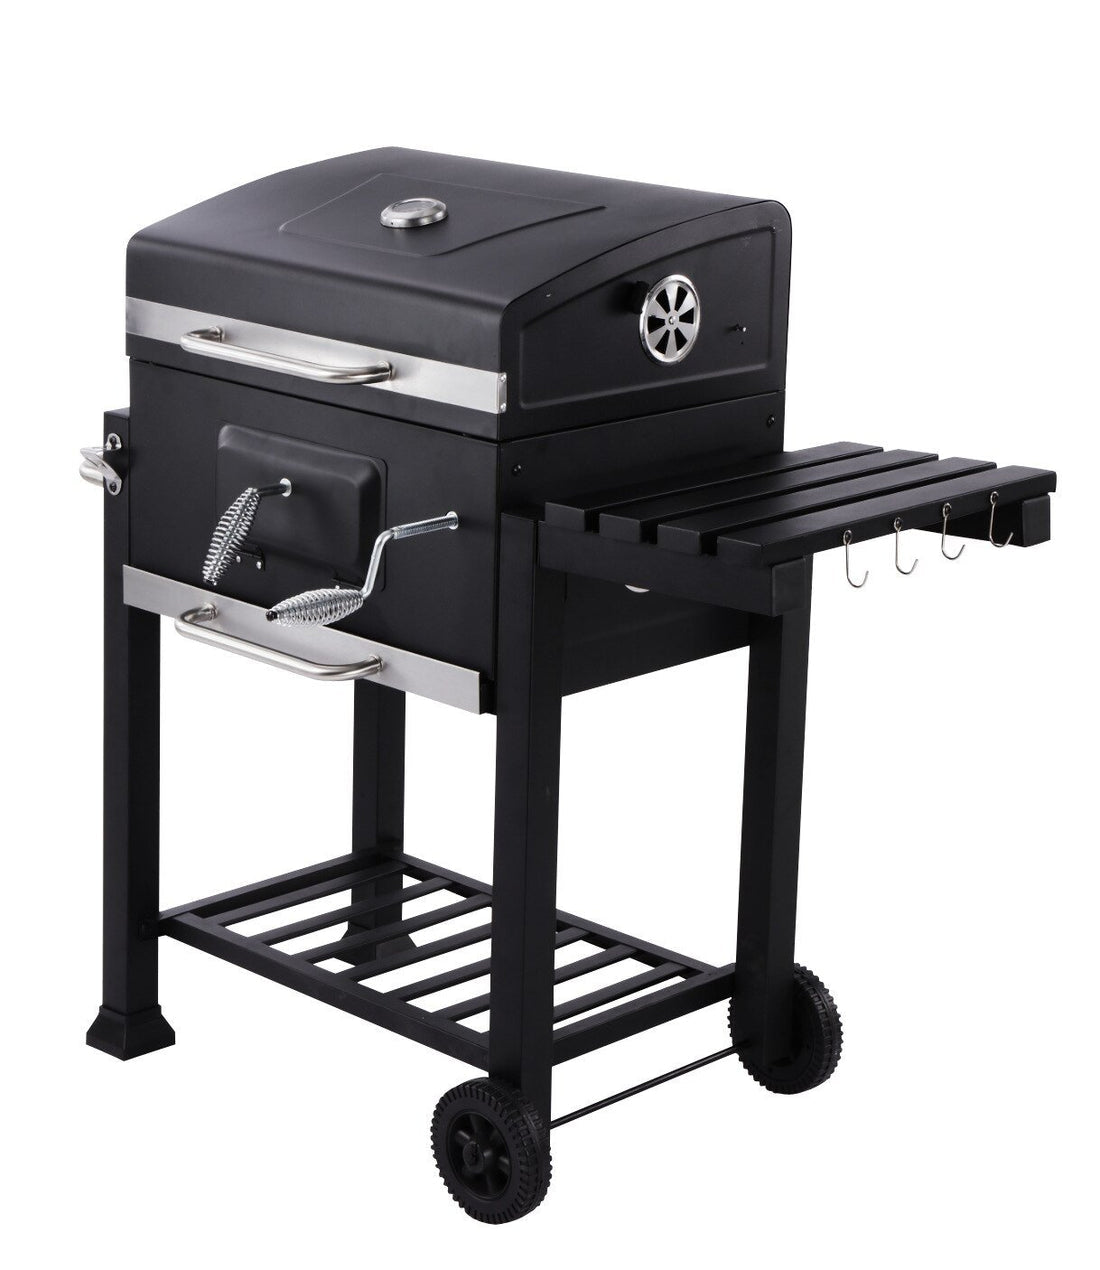 Barbecue Stove Large Square Barbecue Stove Heating Barbecue Grill